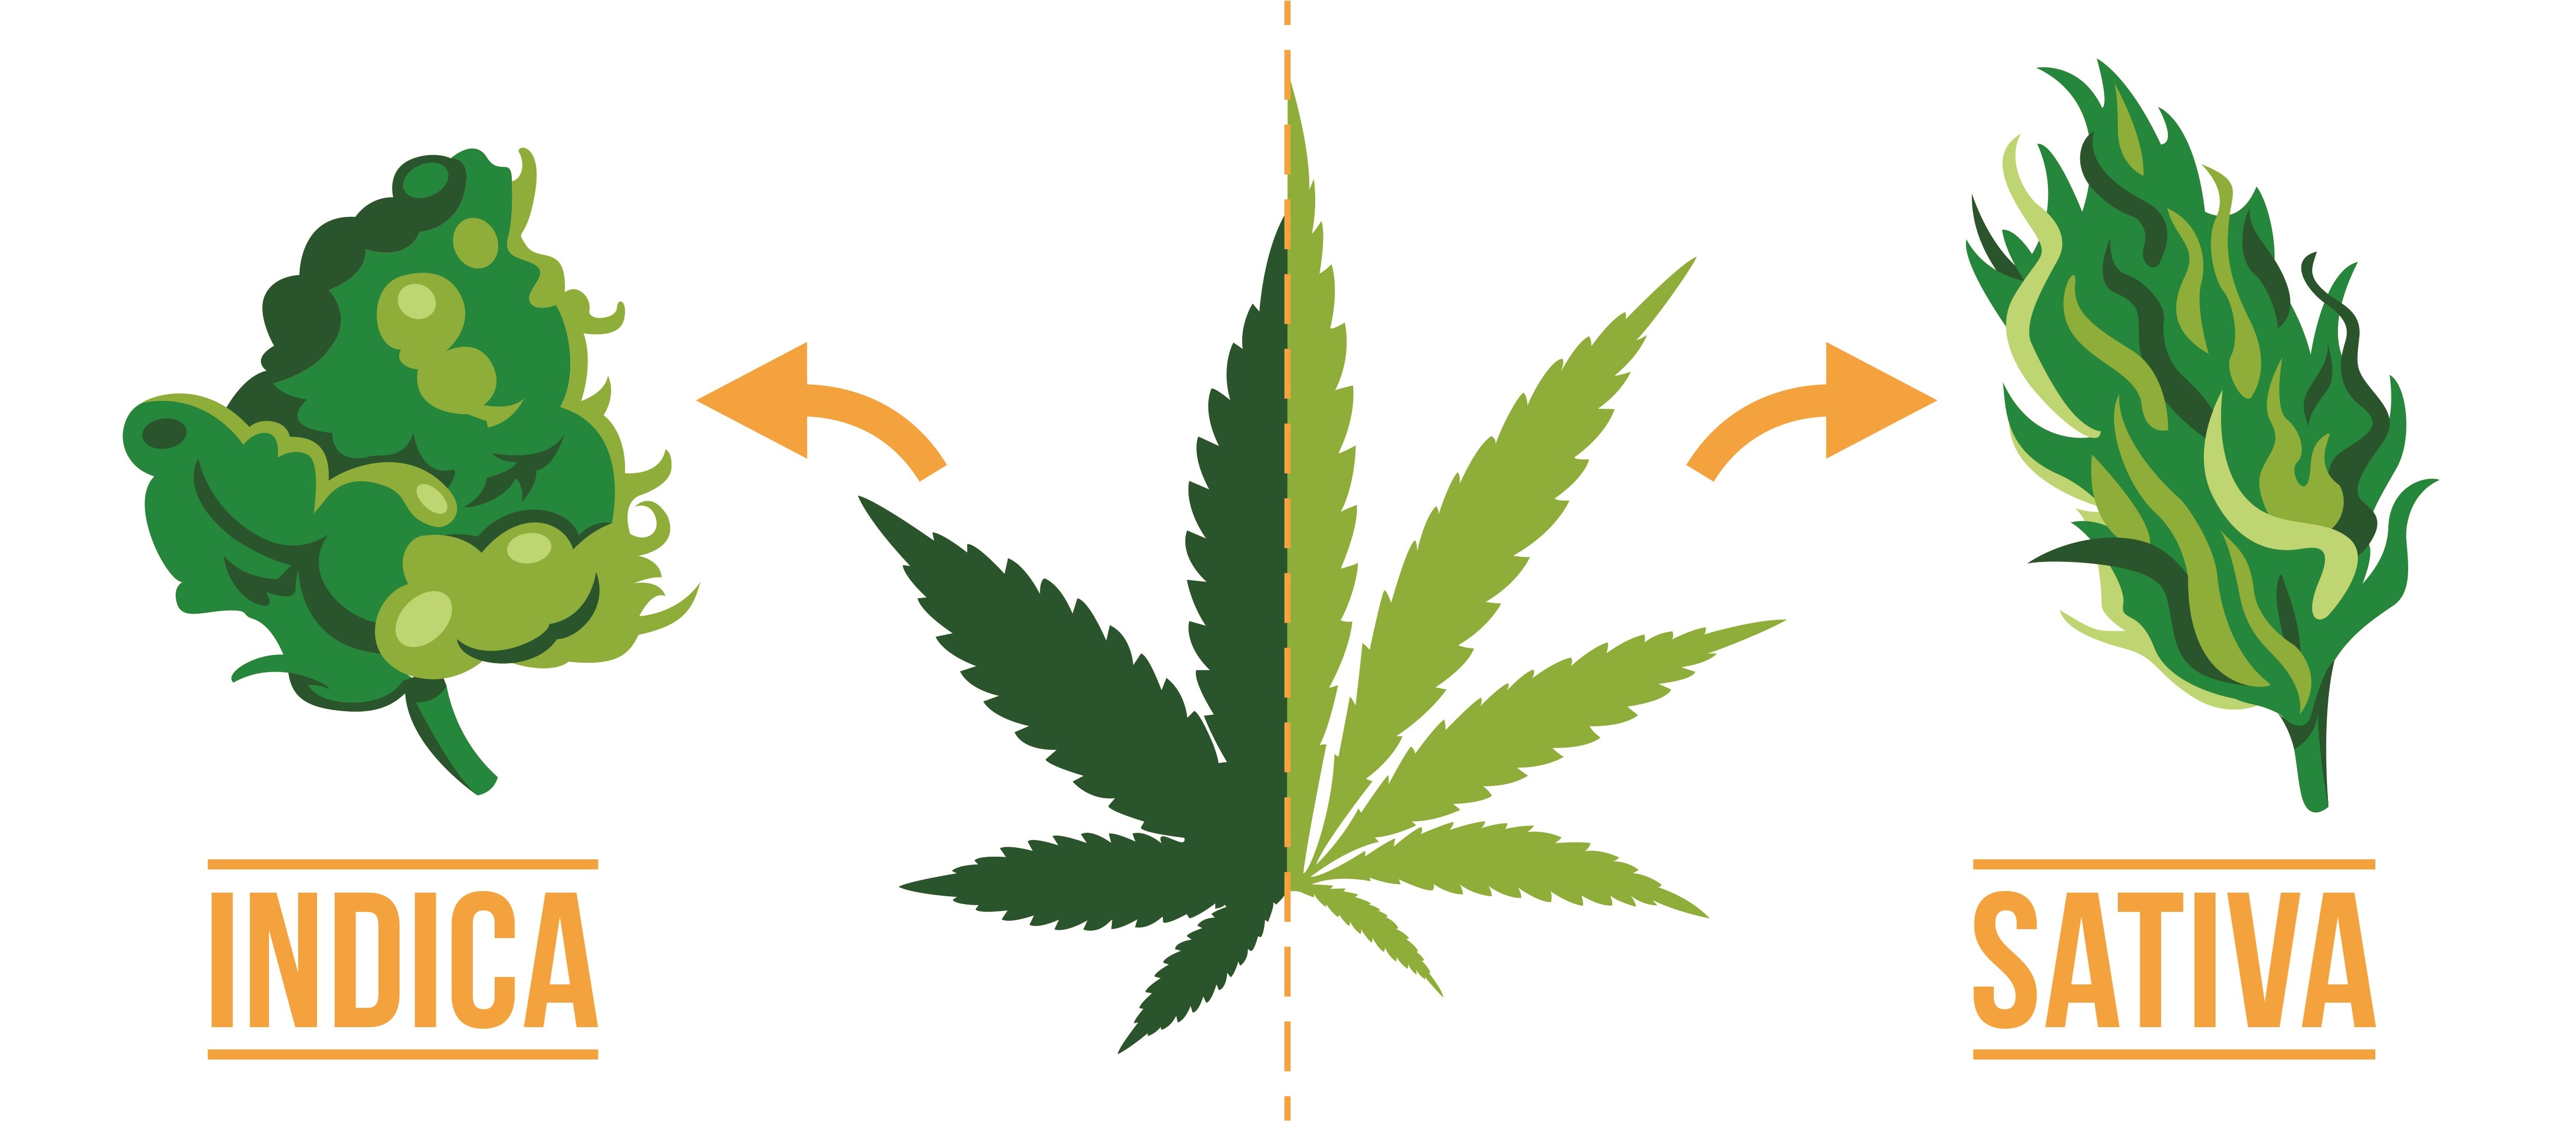 The origins of indica and sativa strains are different, as the two varieties of cannabis originated in different tropical regions.